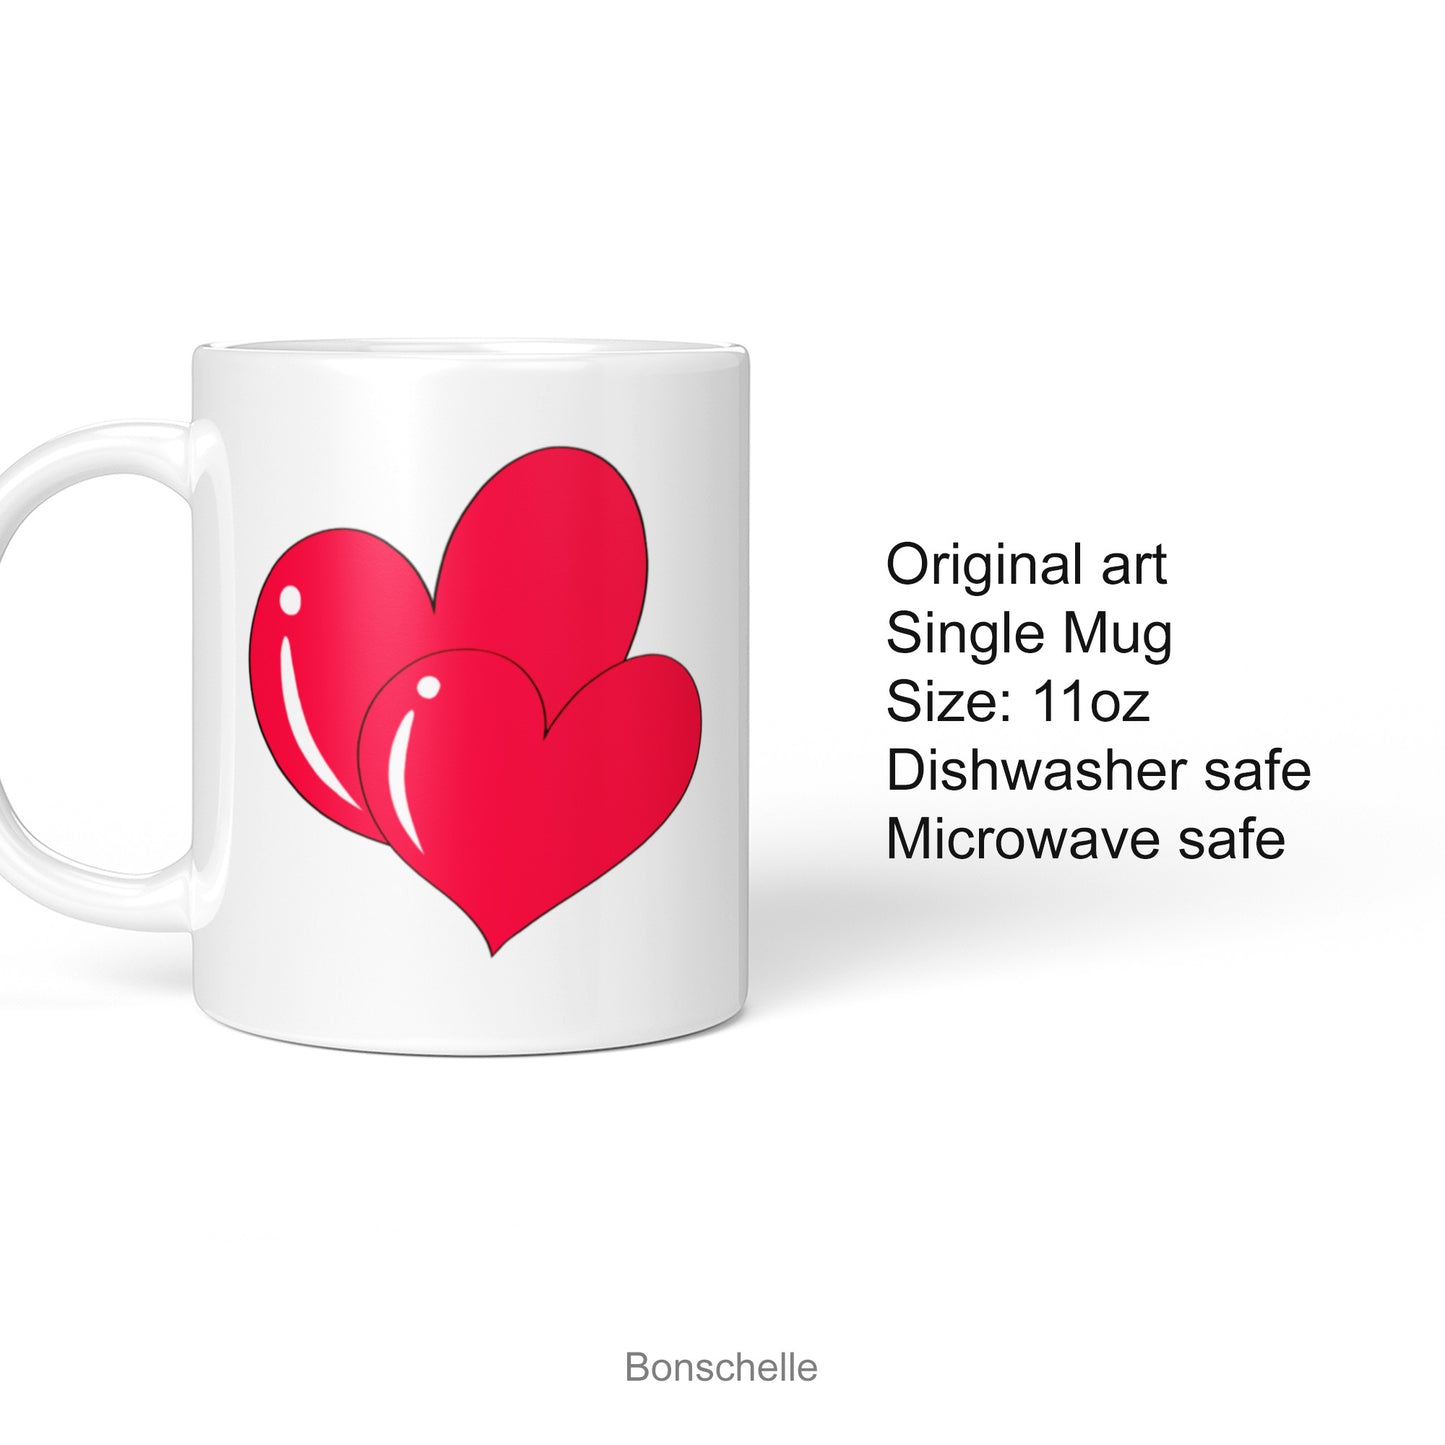 Product details for the Two Hearts Love Mug